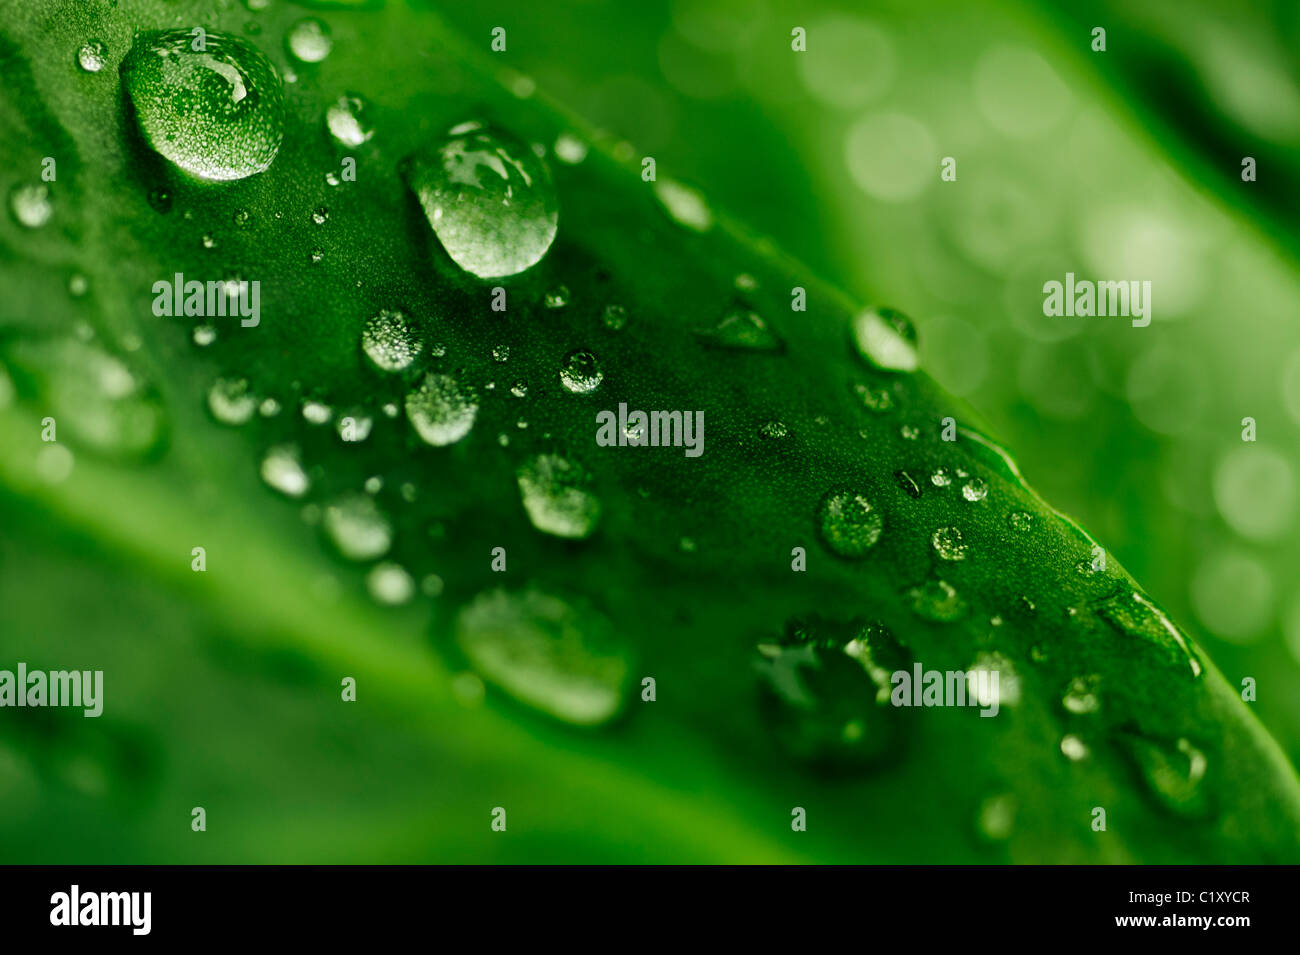 Water drops on a vibrant green leaf Stock Photo